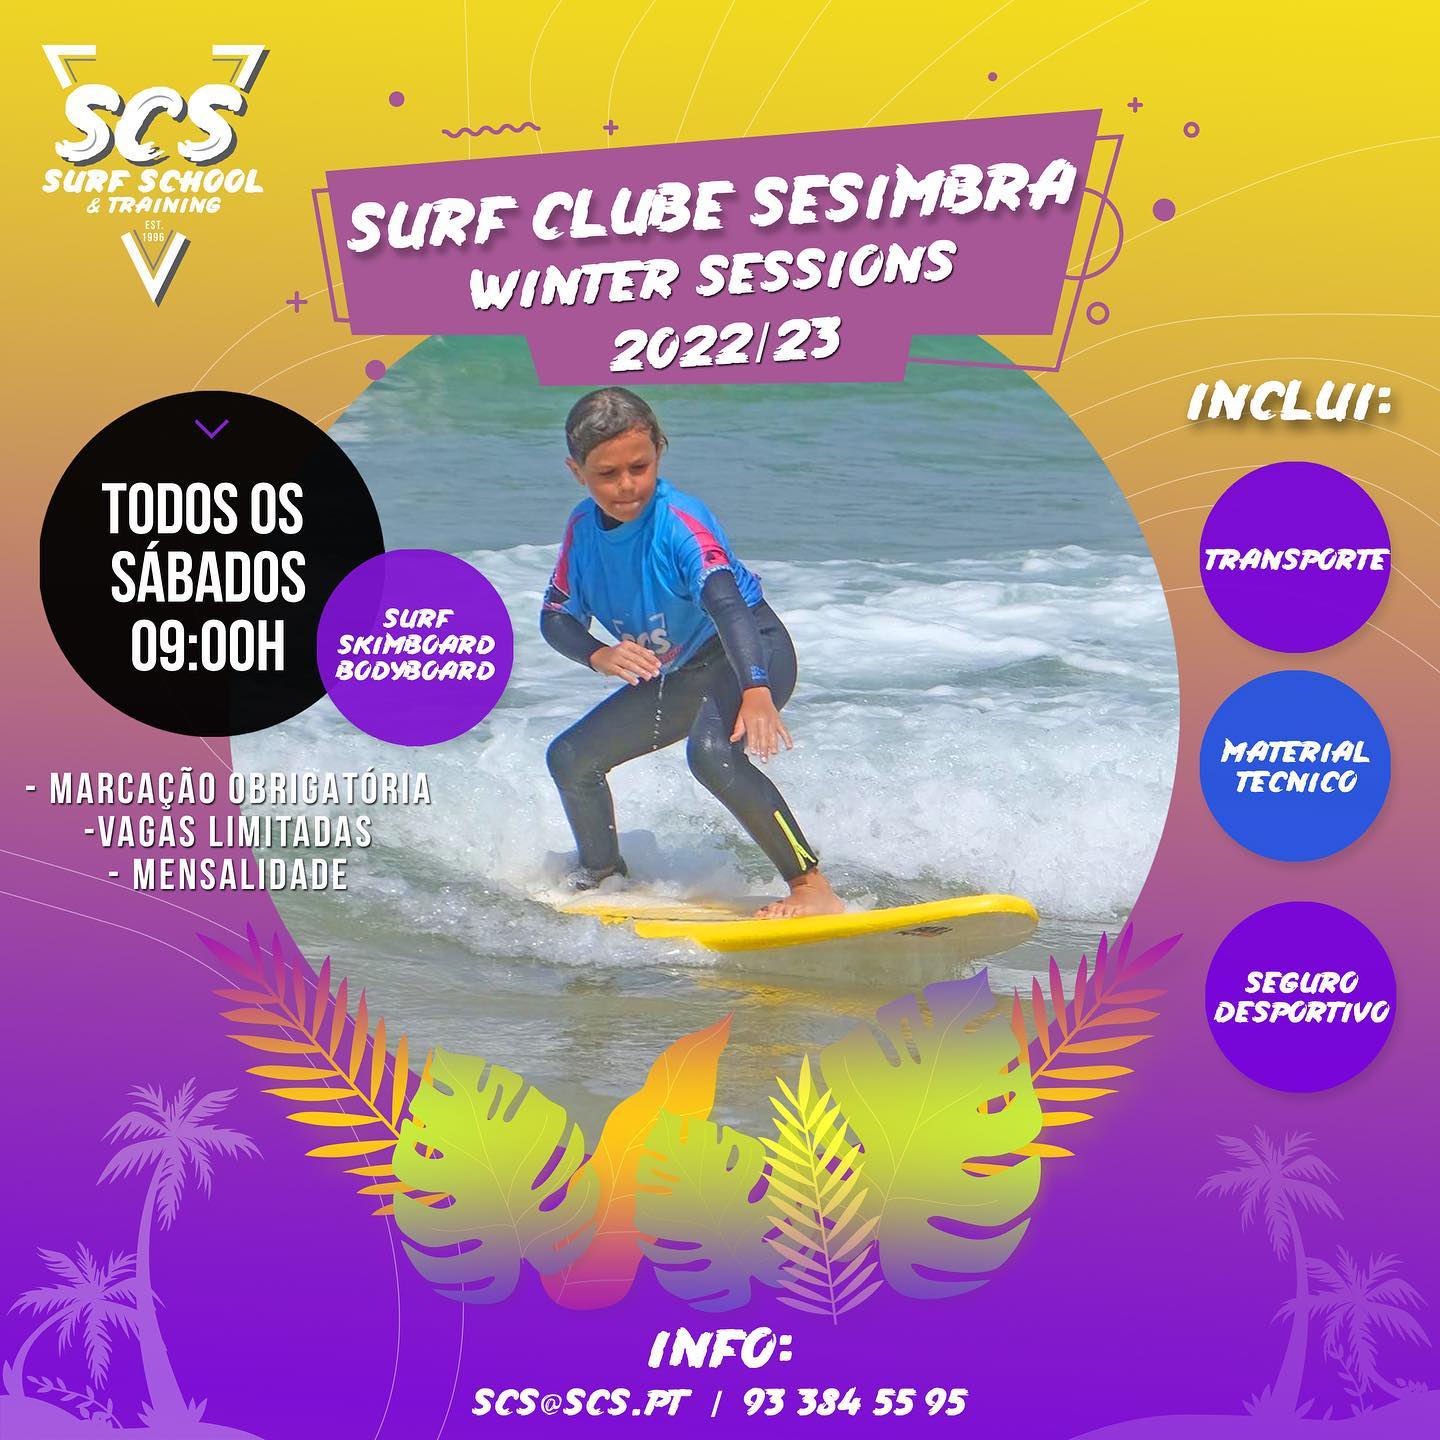 WINTER SESSIONS by #SCS